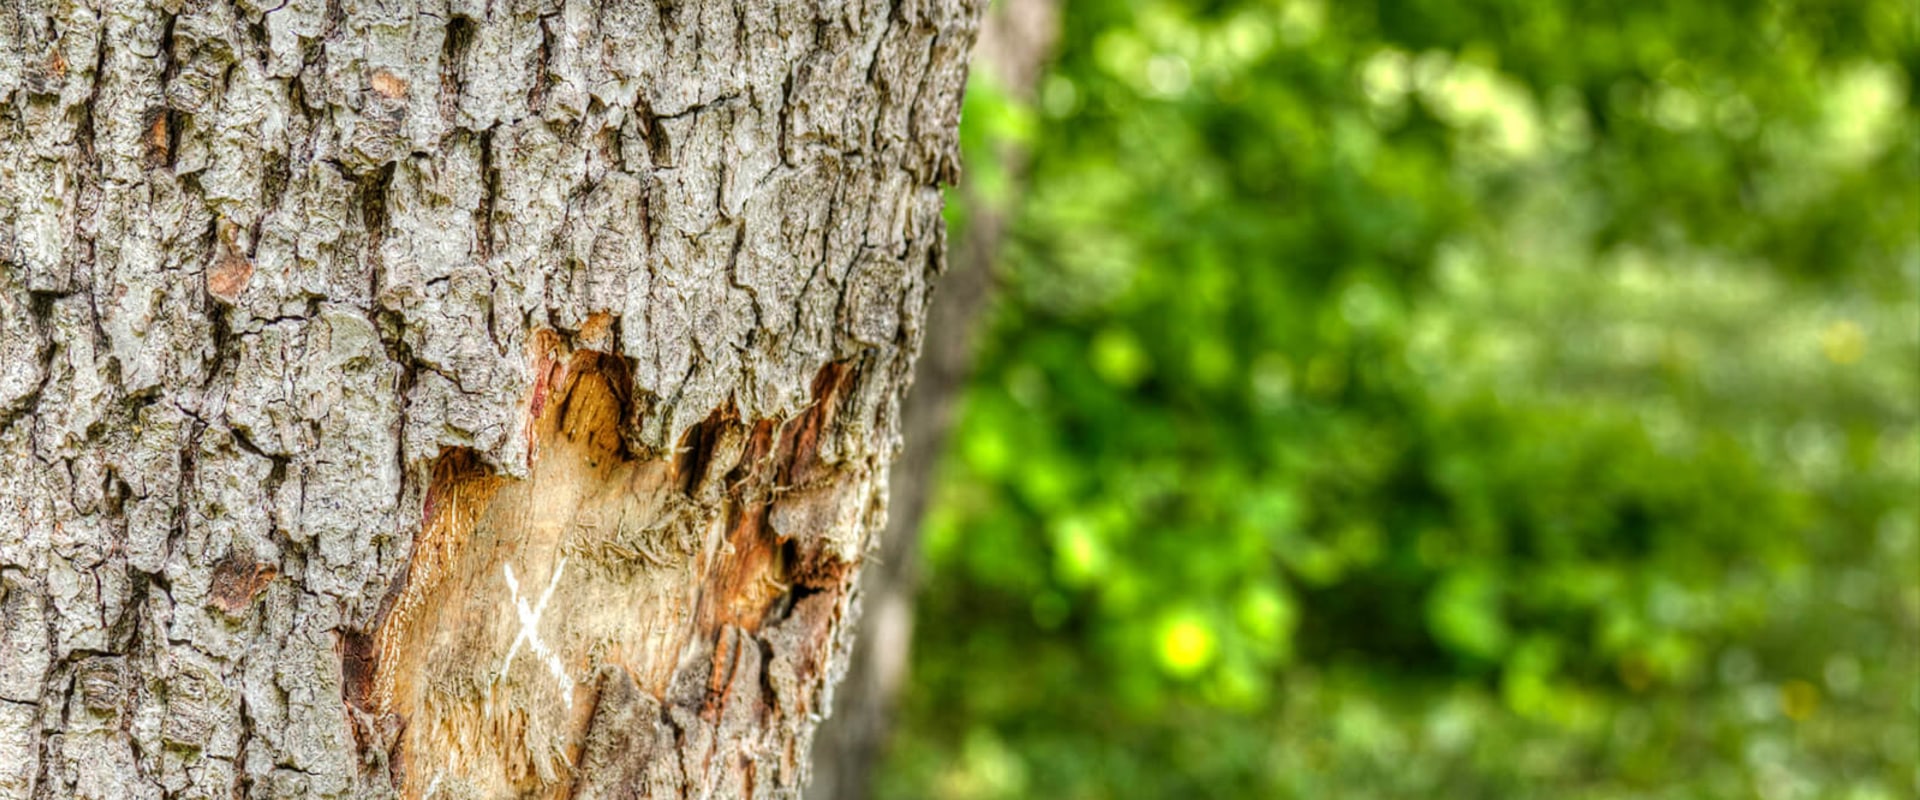 Can a tree trunk repair itself?